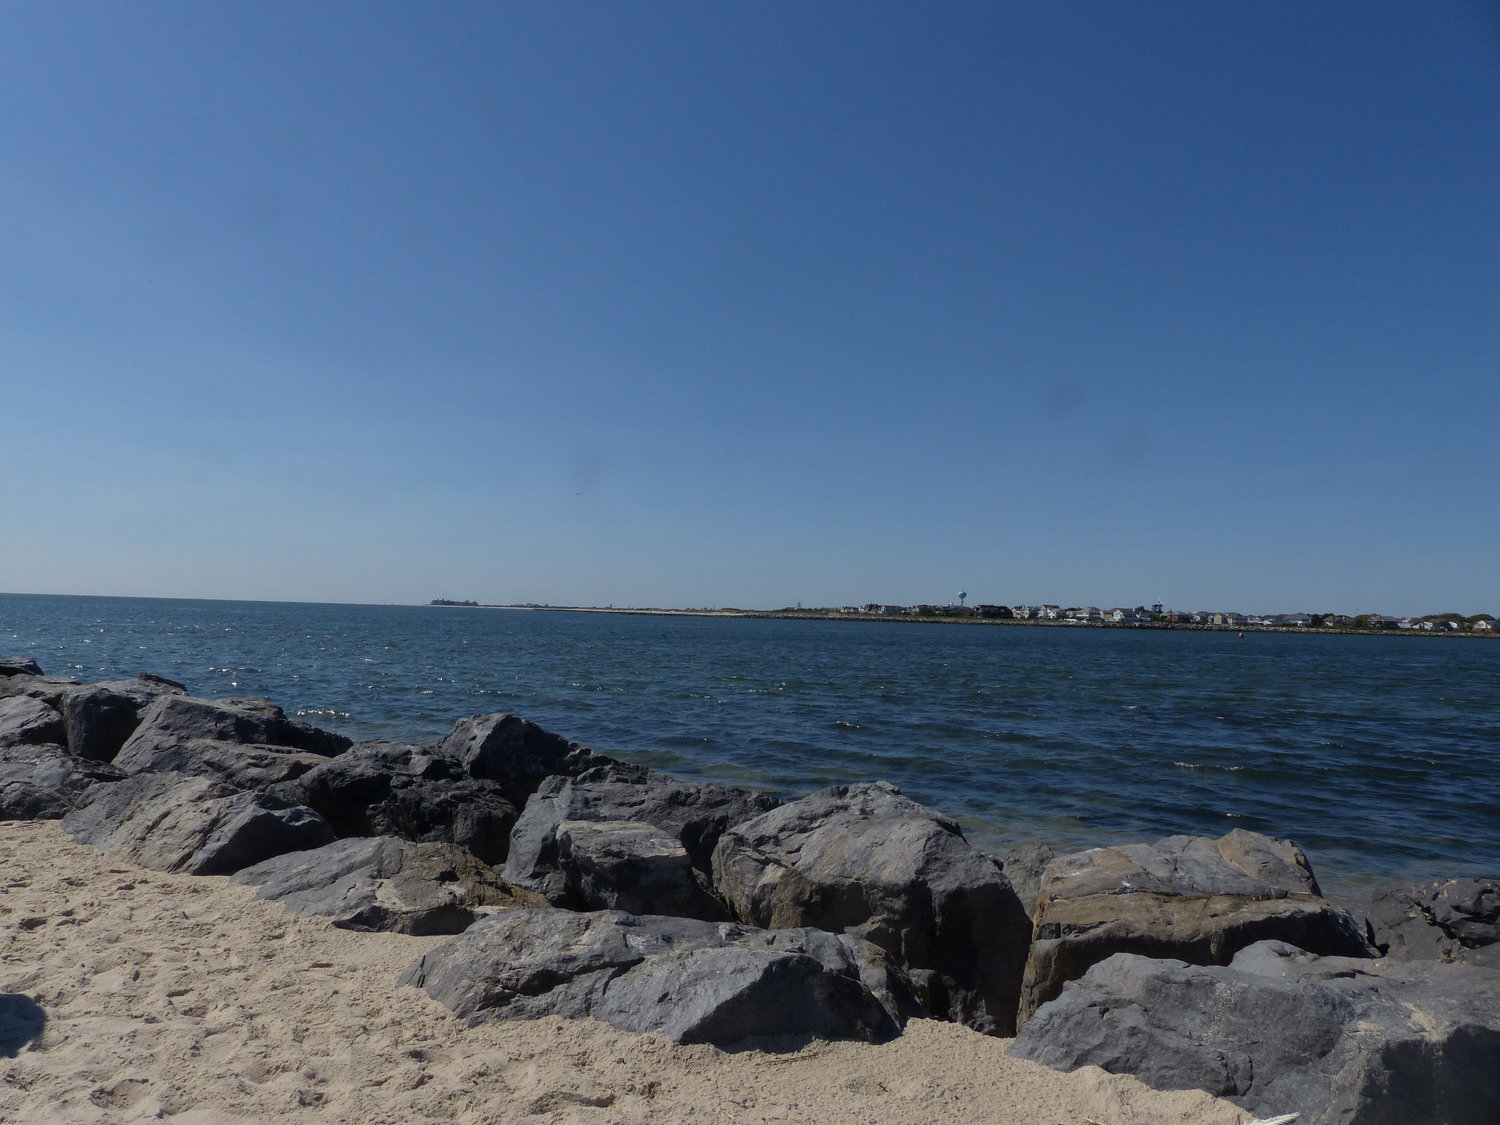 A view of Long Beach from the Jones Beach jetty, which helps control the long shore drift to build up the beach.